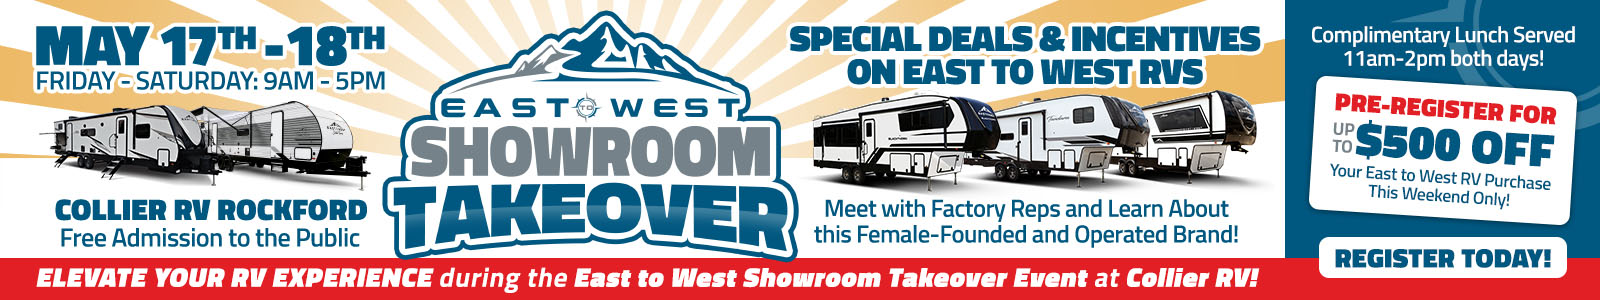 East-to-West Showroom Takeover